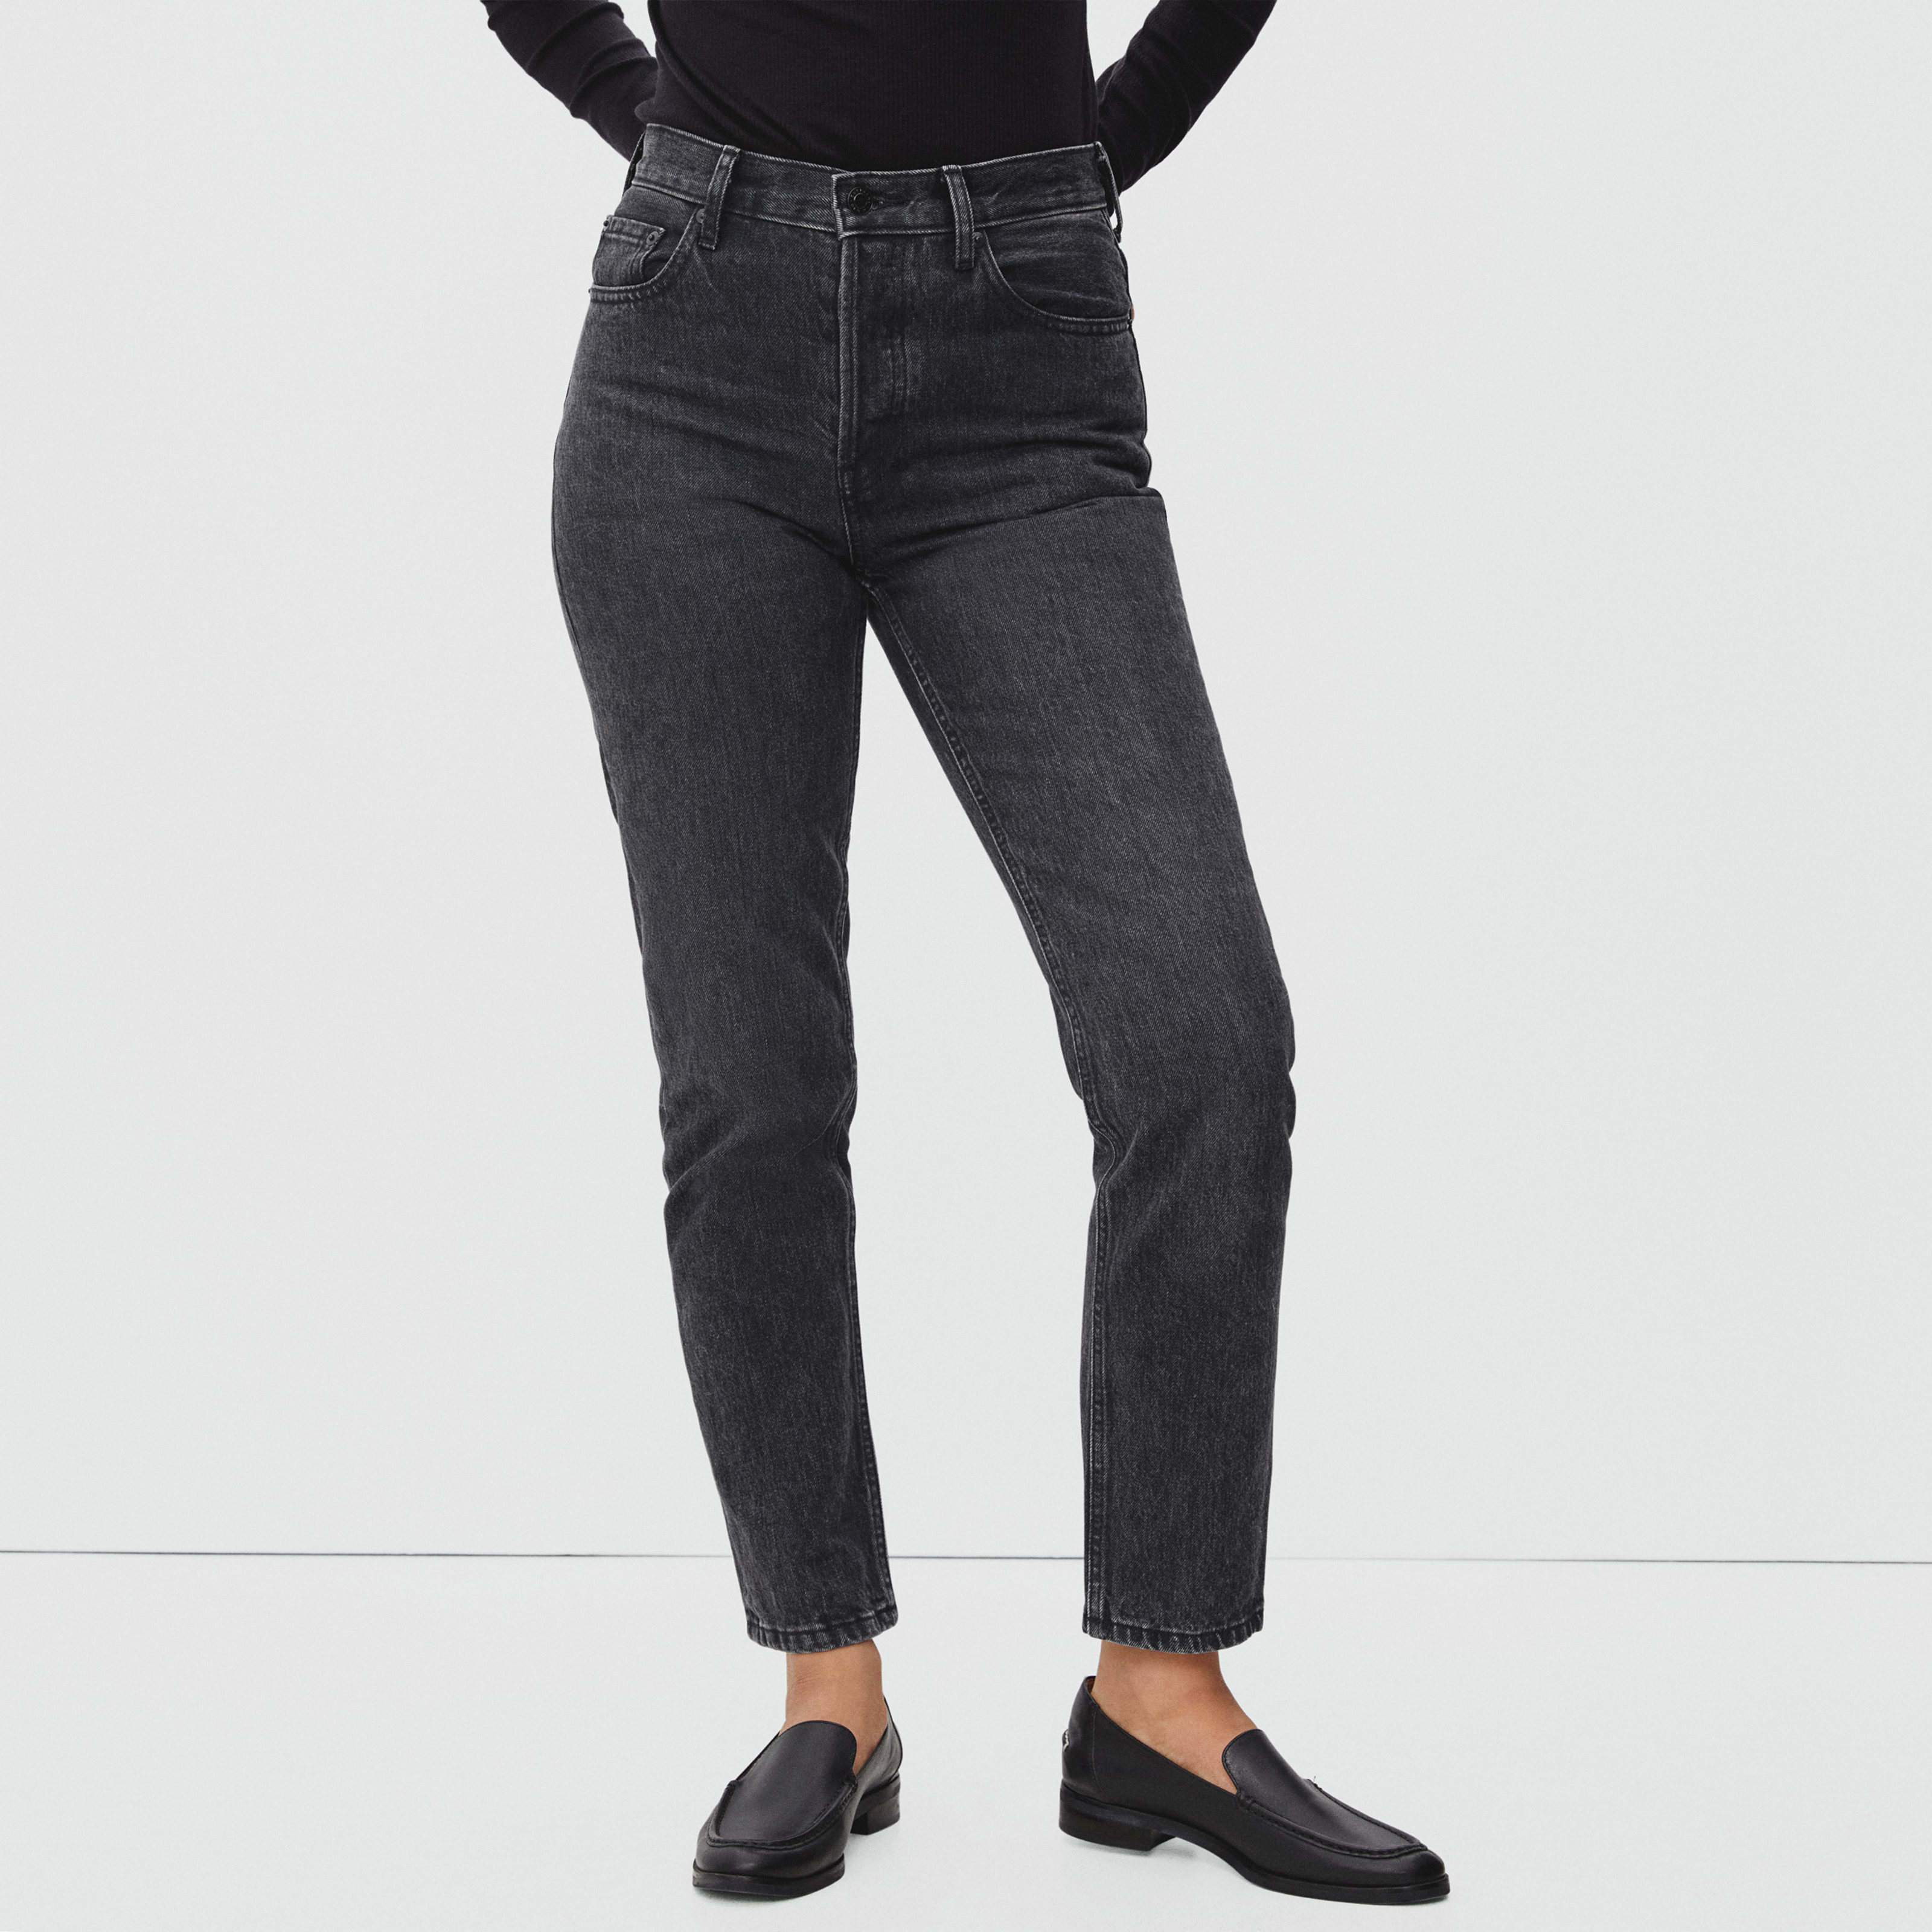 Women's '90s Cheeky Jean by Everlane in Washed Black, Size 23